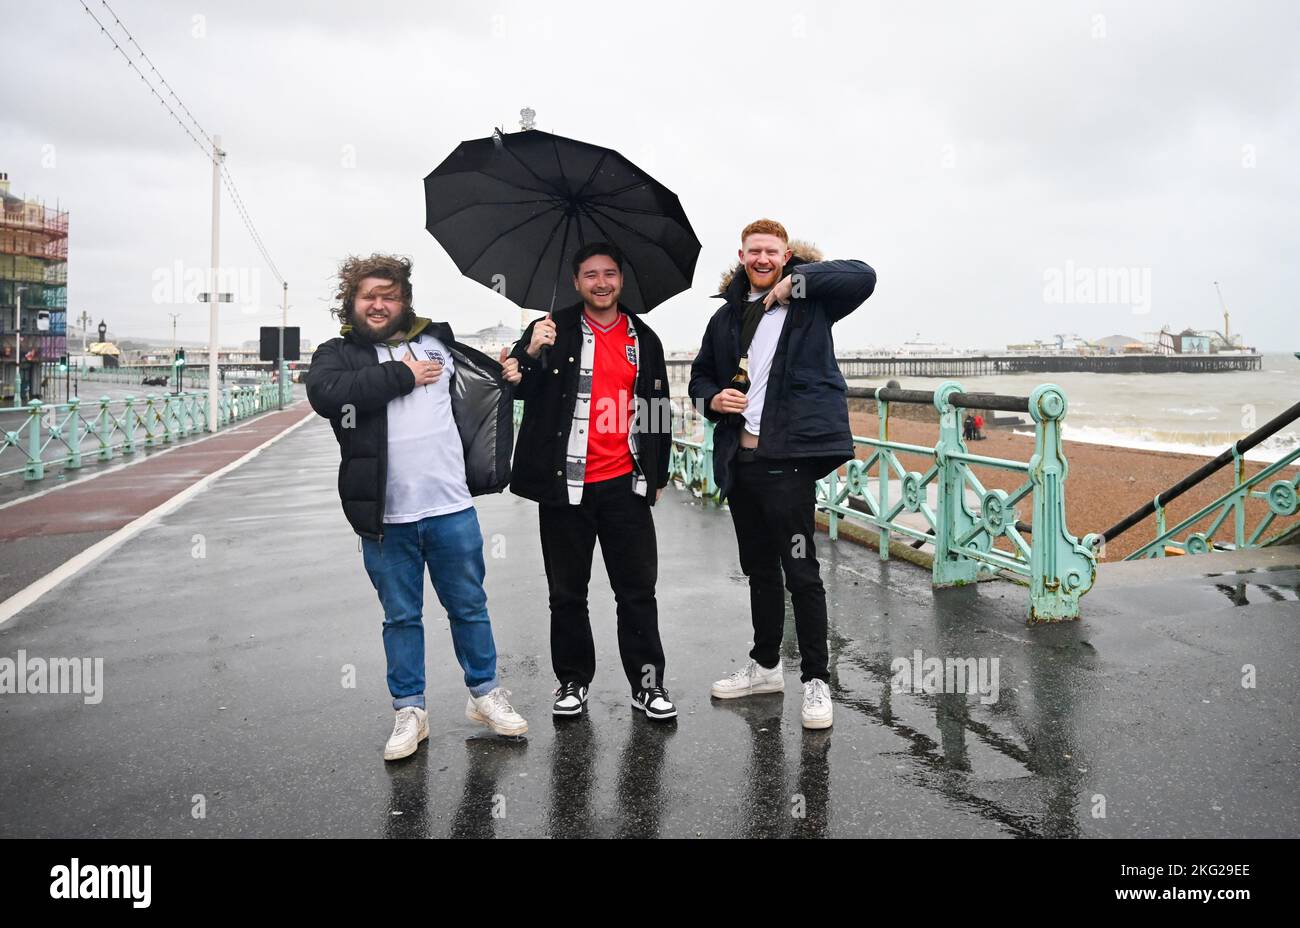 Brighton UK 21st November 2022 - England fans battle the wind and rain on Brighton seafront as they make their way to a bar to watch the Qatar World Cup match between England and Iran today : Credit Simon Dack / Alamy Live News Stock Photo